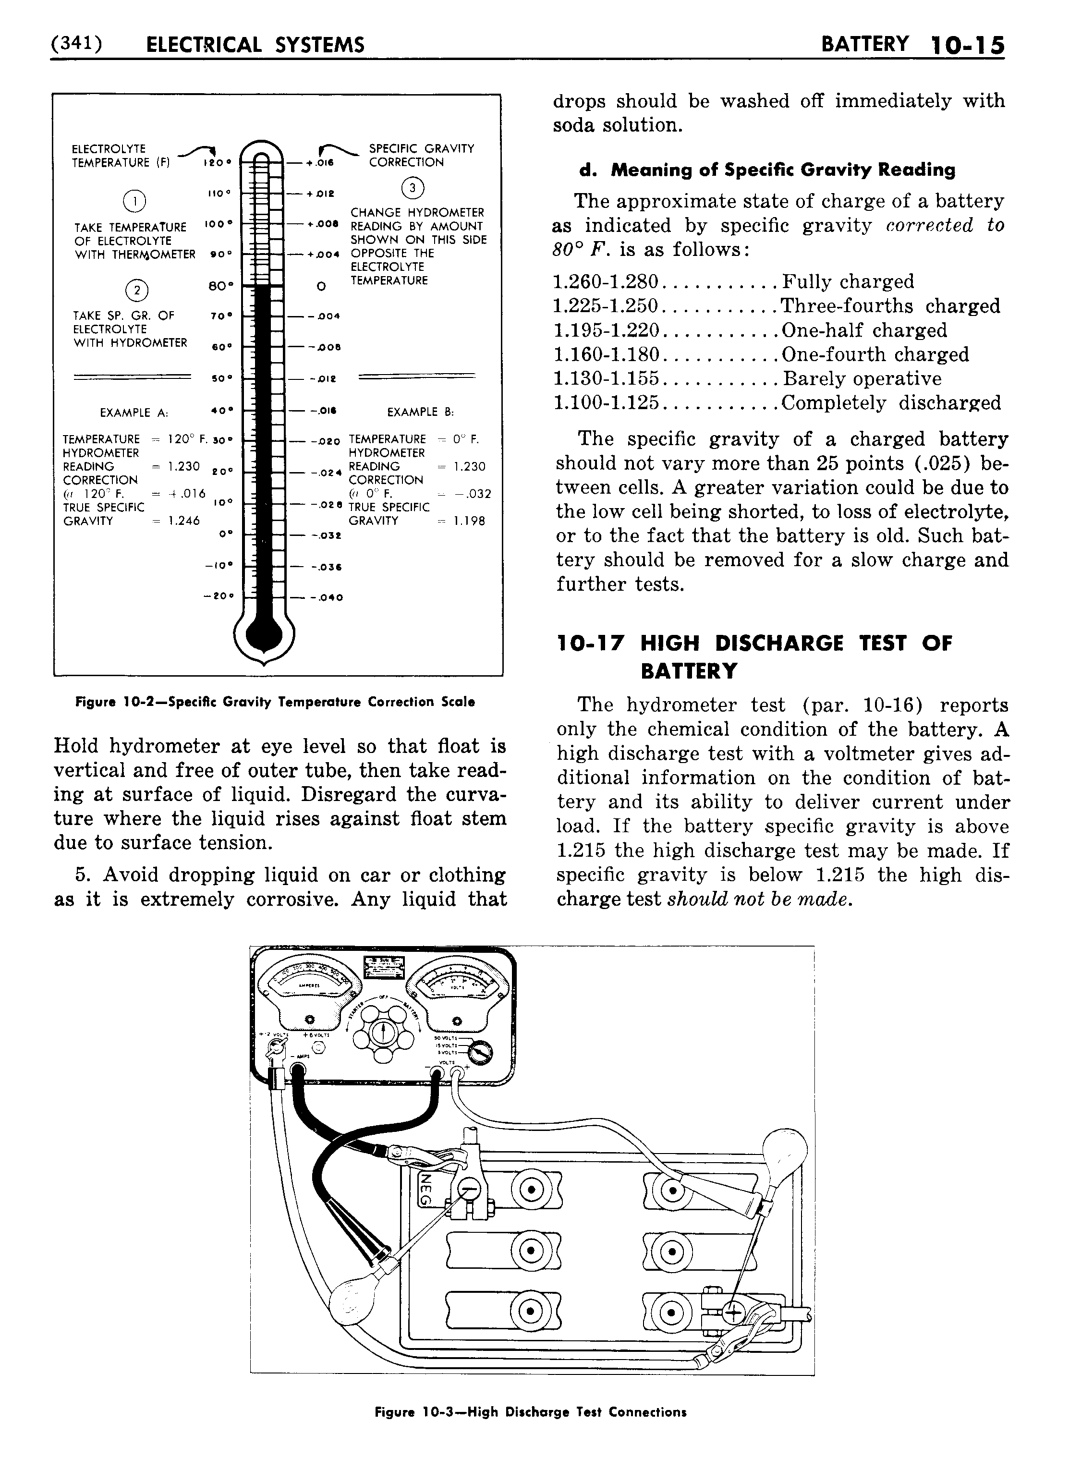 n_11 1956 Buick Shop Manual - Electrical Systems-015-015.jpg